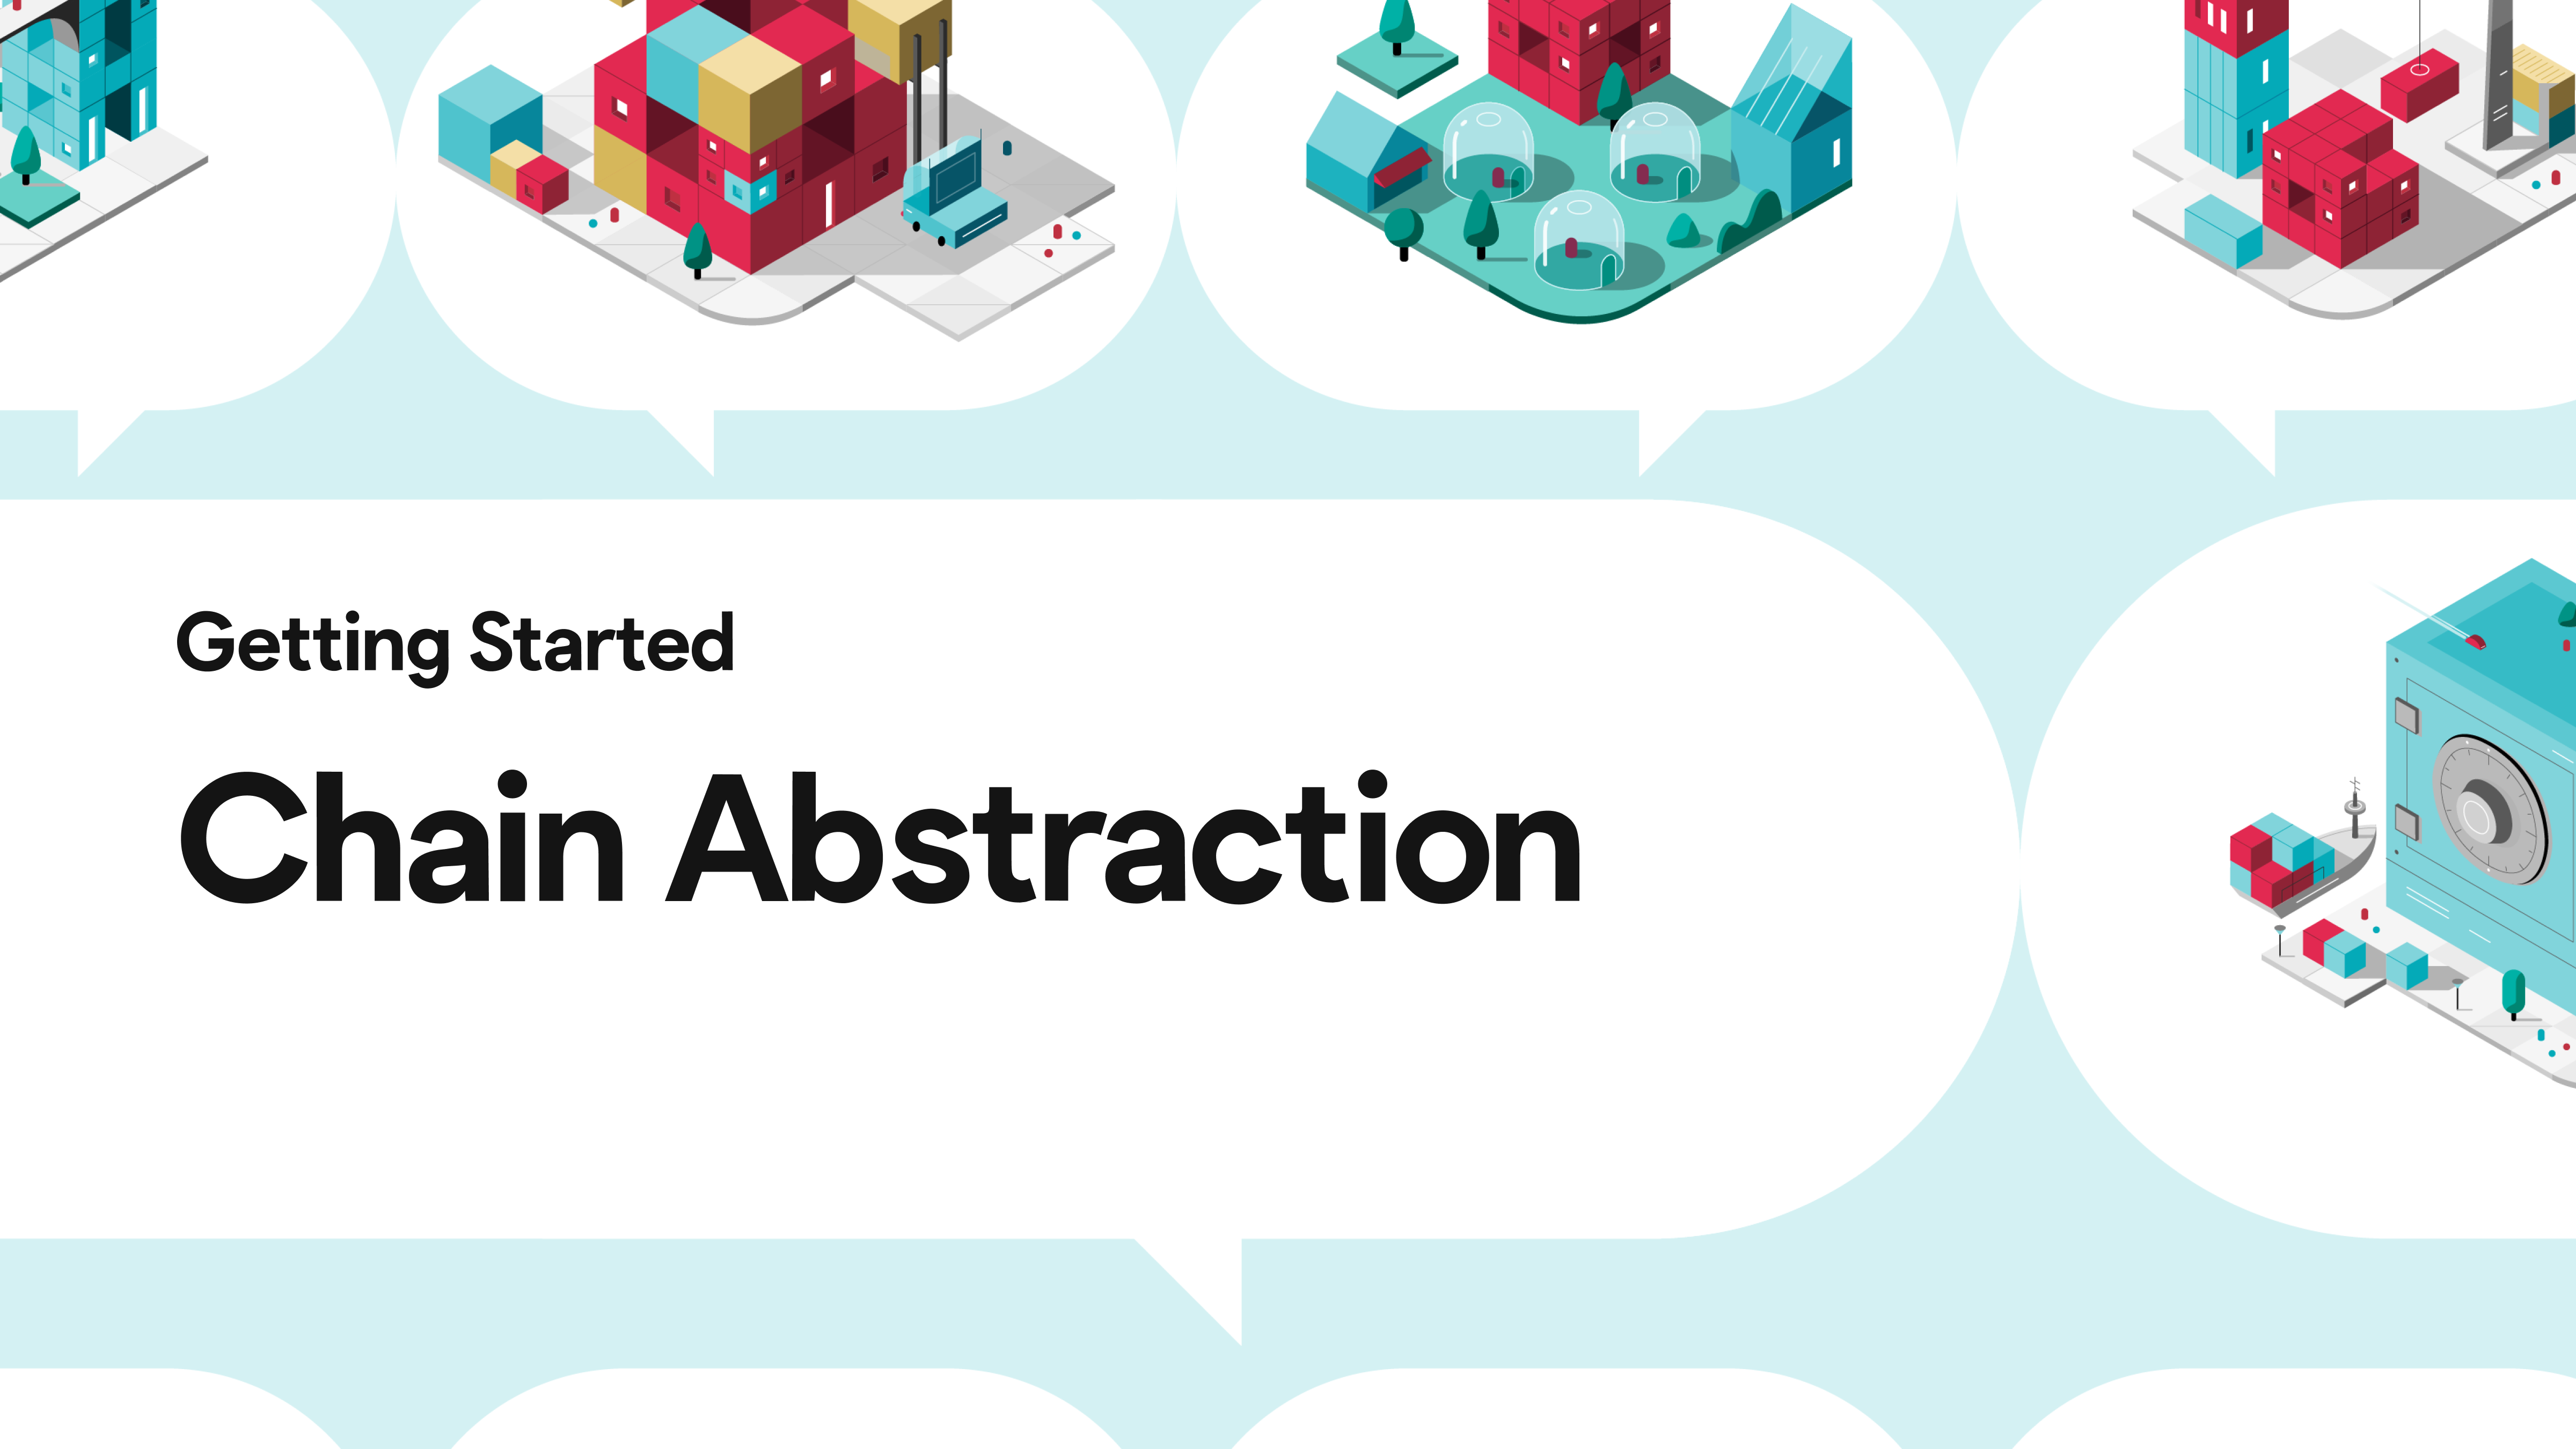 Getting Started: Chain Abstraction